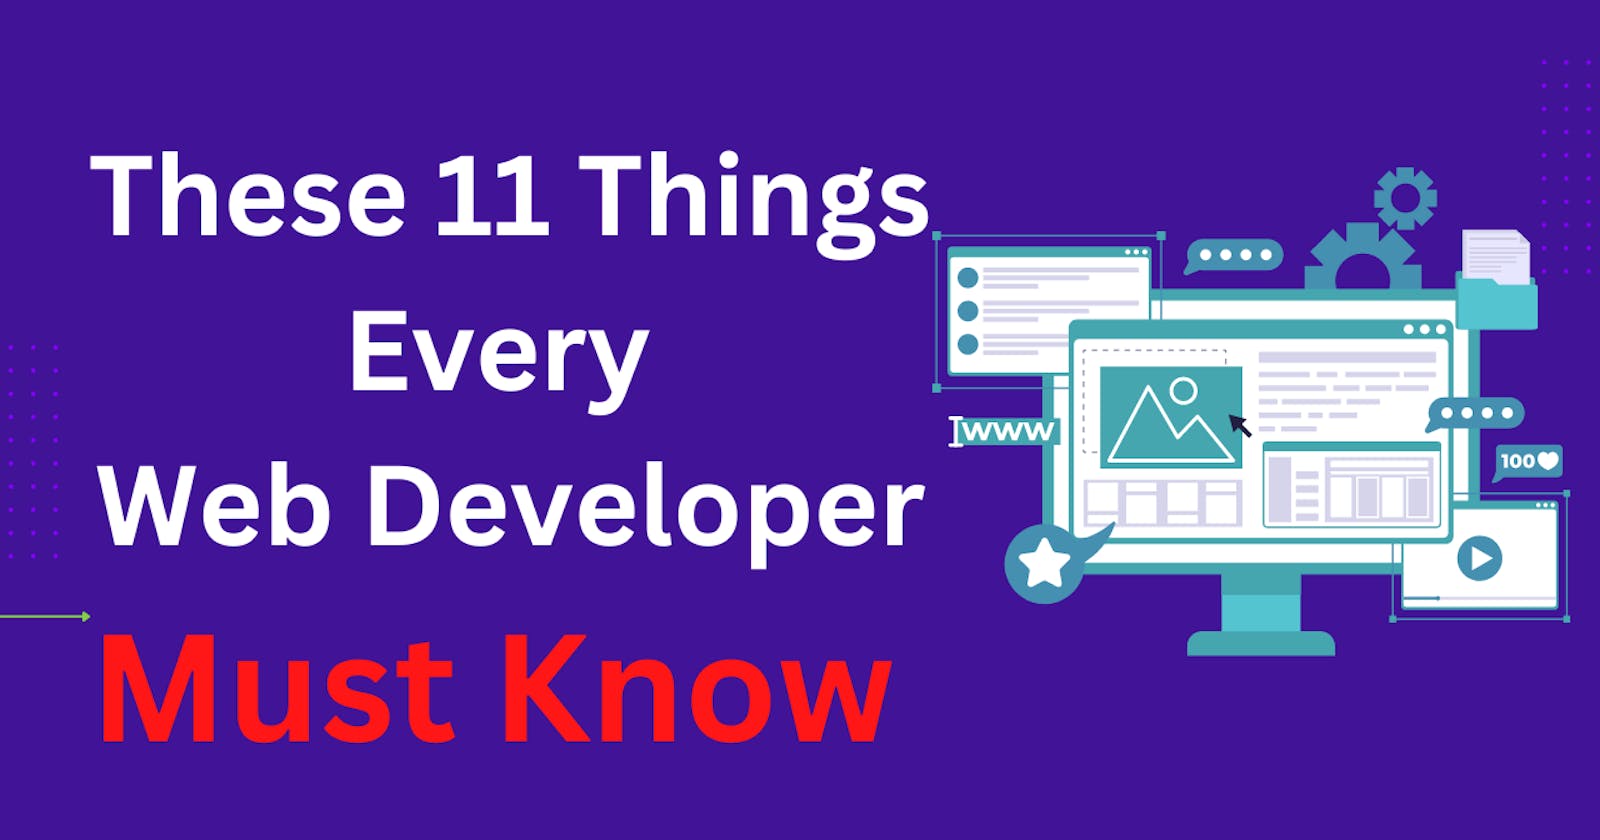 These 11 Things Every Web Developer Must Know